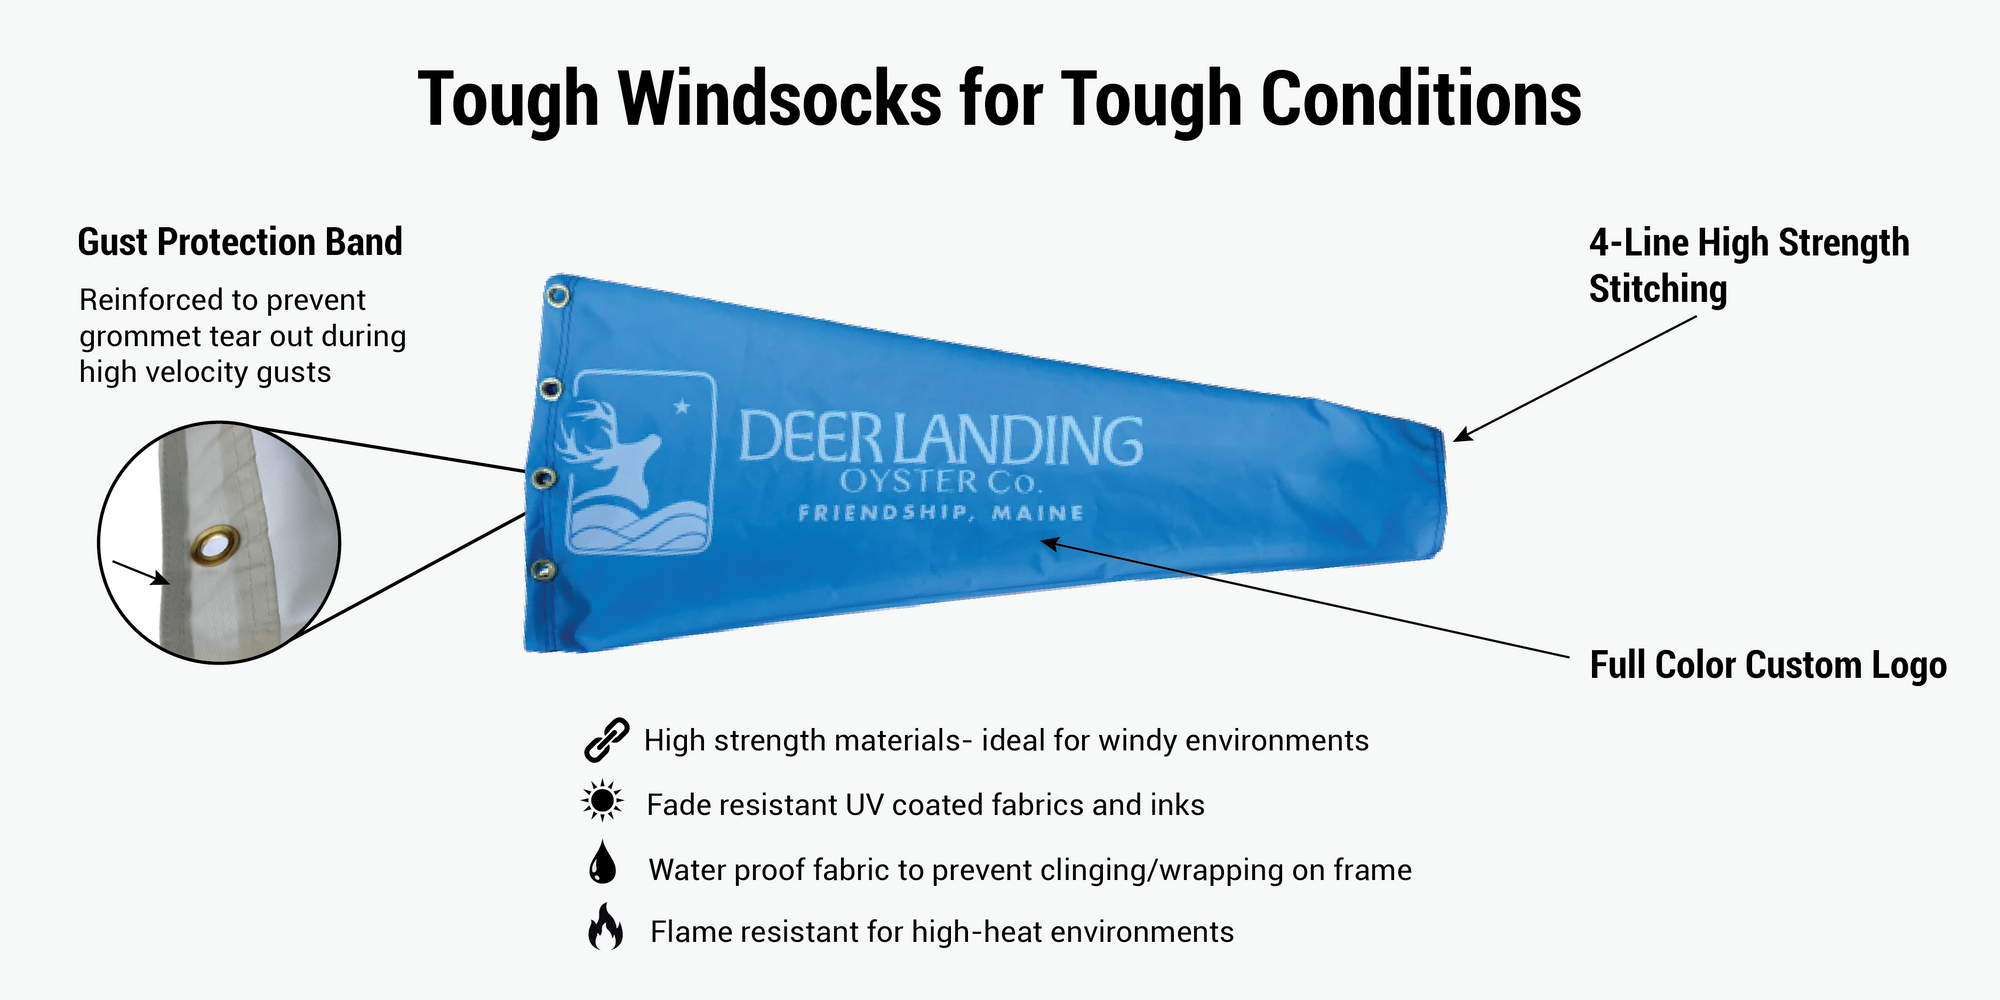 Custom printed marine windsock infographic ideal for saline and marine locations. Resistant to mold, corrosion, water proof, and reinforced for strong winds